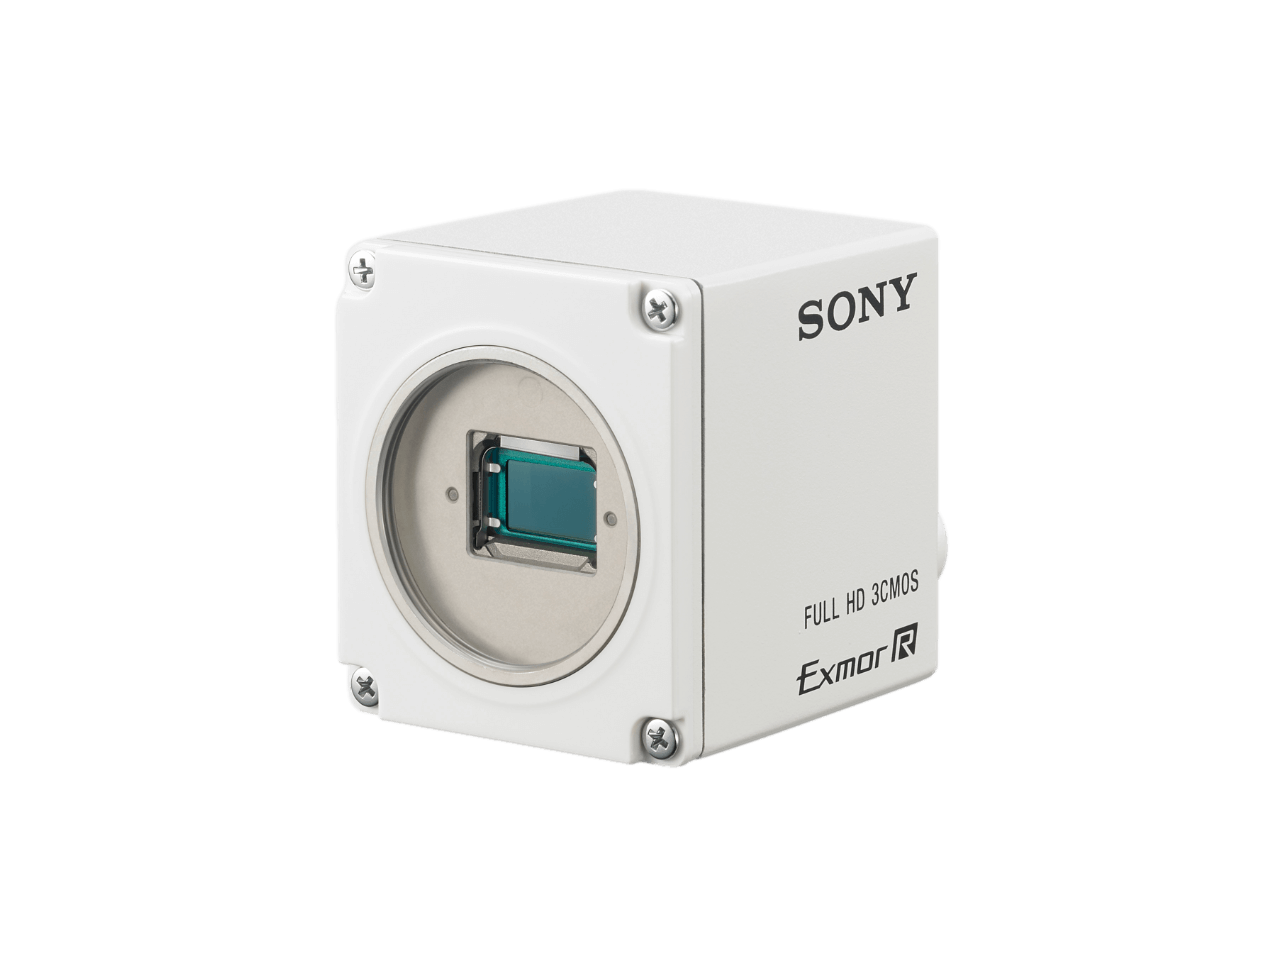 The Sony MCC-1000MD Full HD Surgical Video Camera is designed for medical microsurgical applications including ophthalmology and neurology procedures